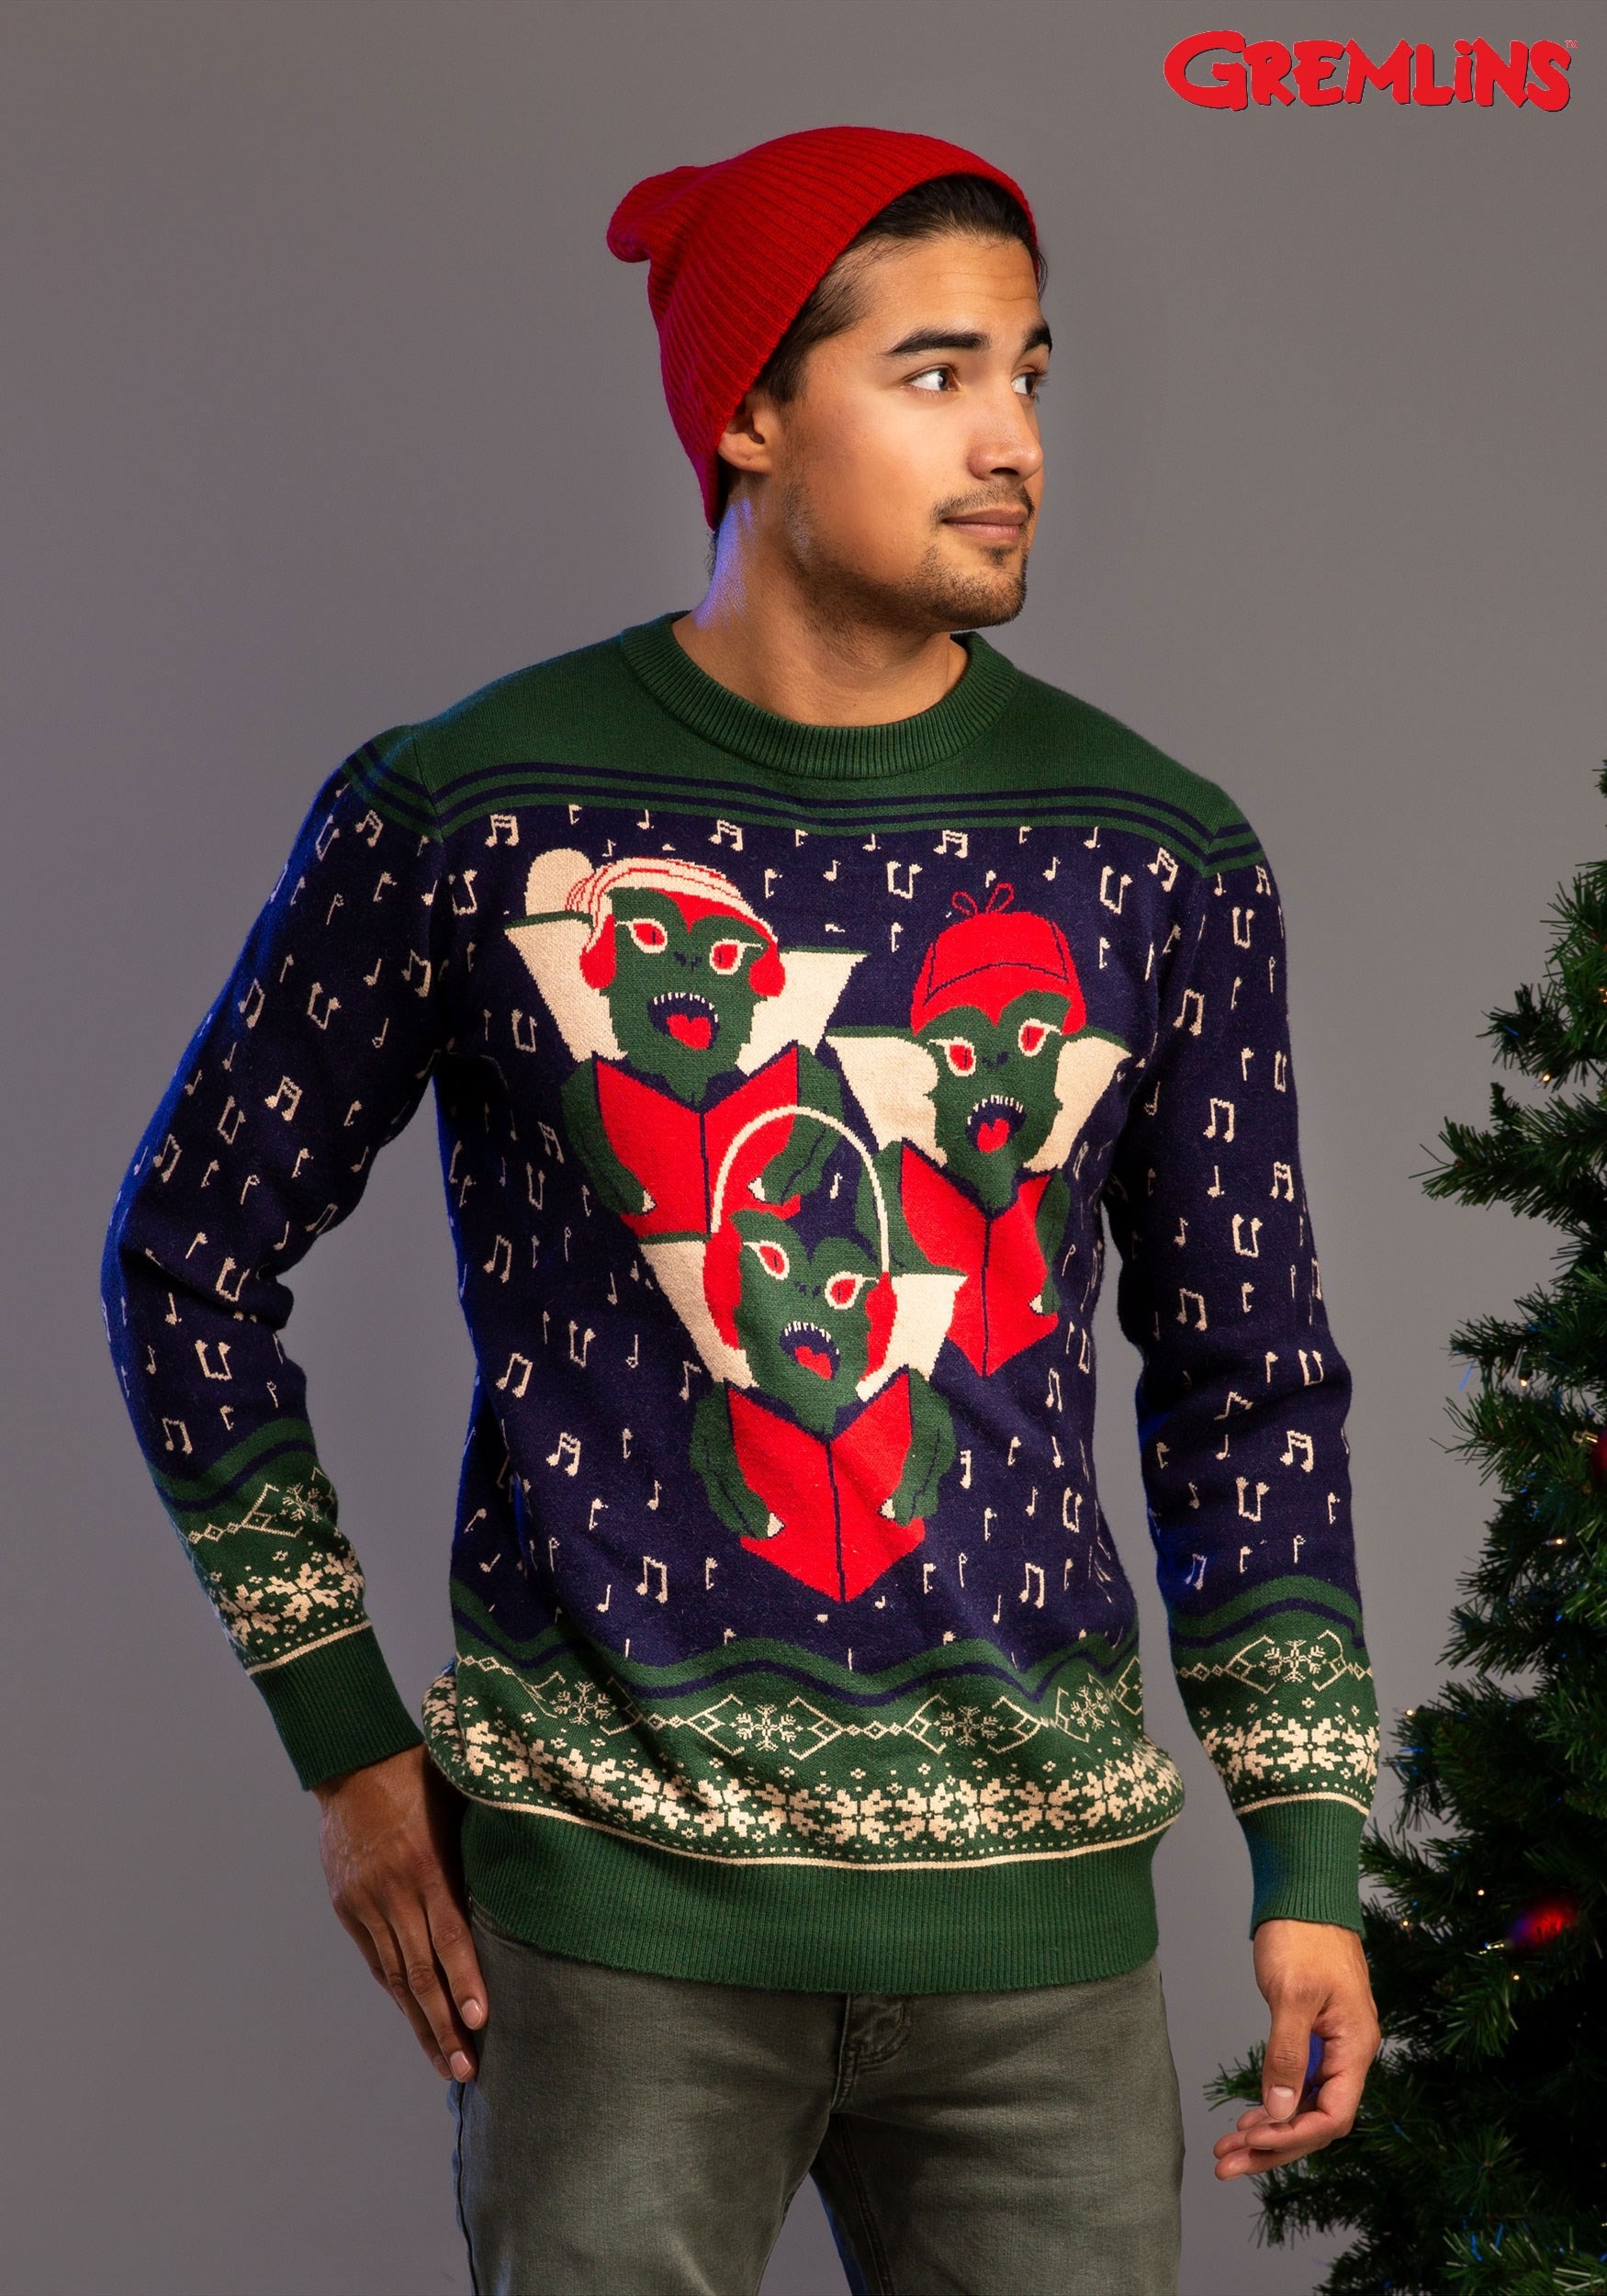 Gremlins Mondo Holiday Christmas Ugly Sweater Men's Large NEW Sold Out All sizes 